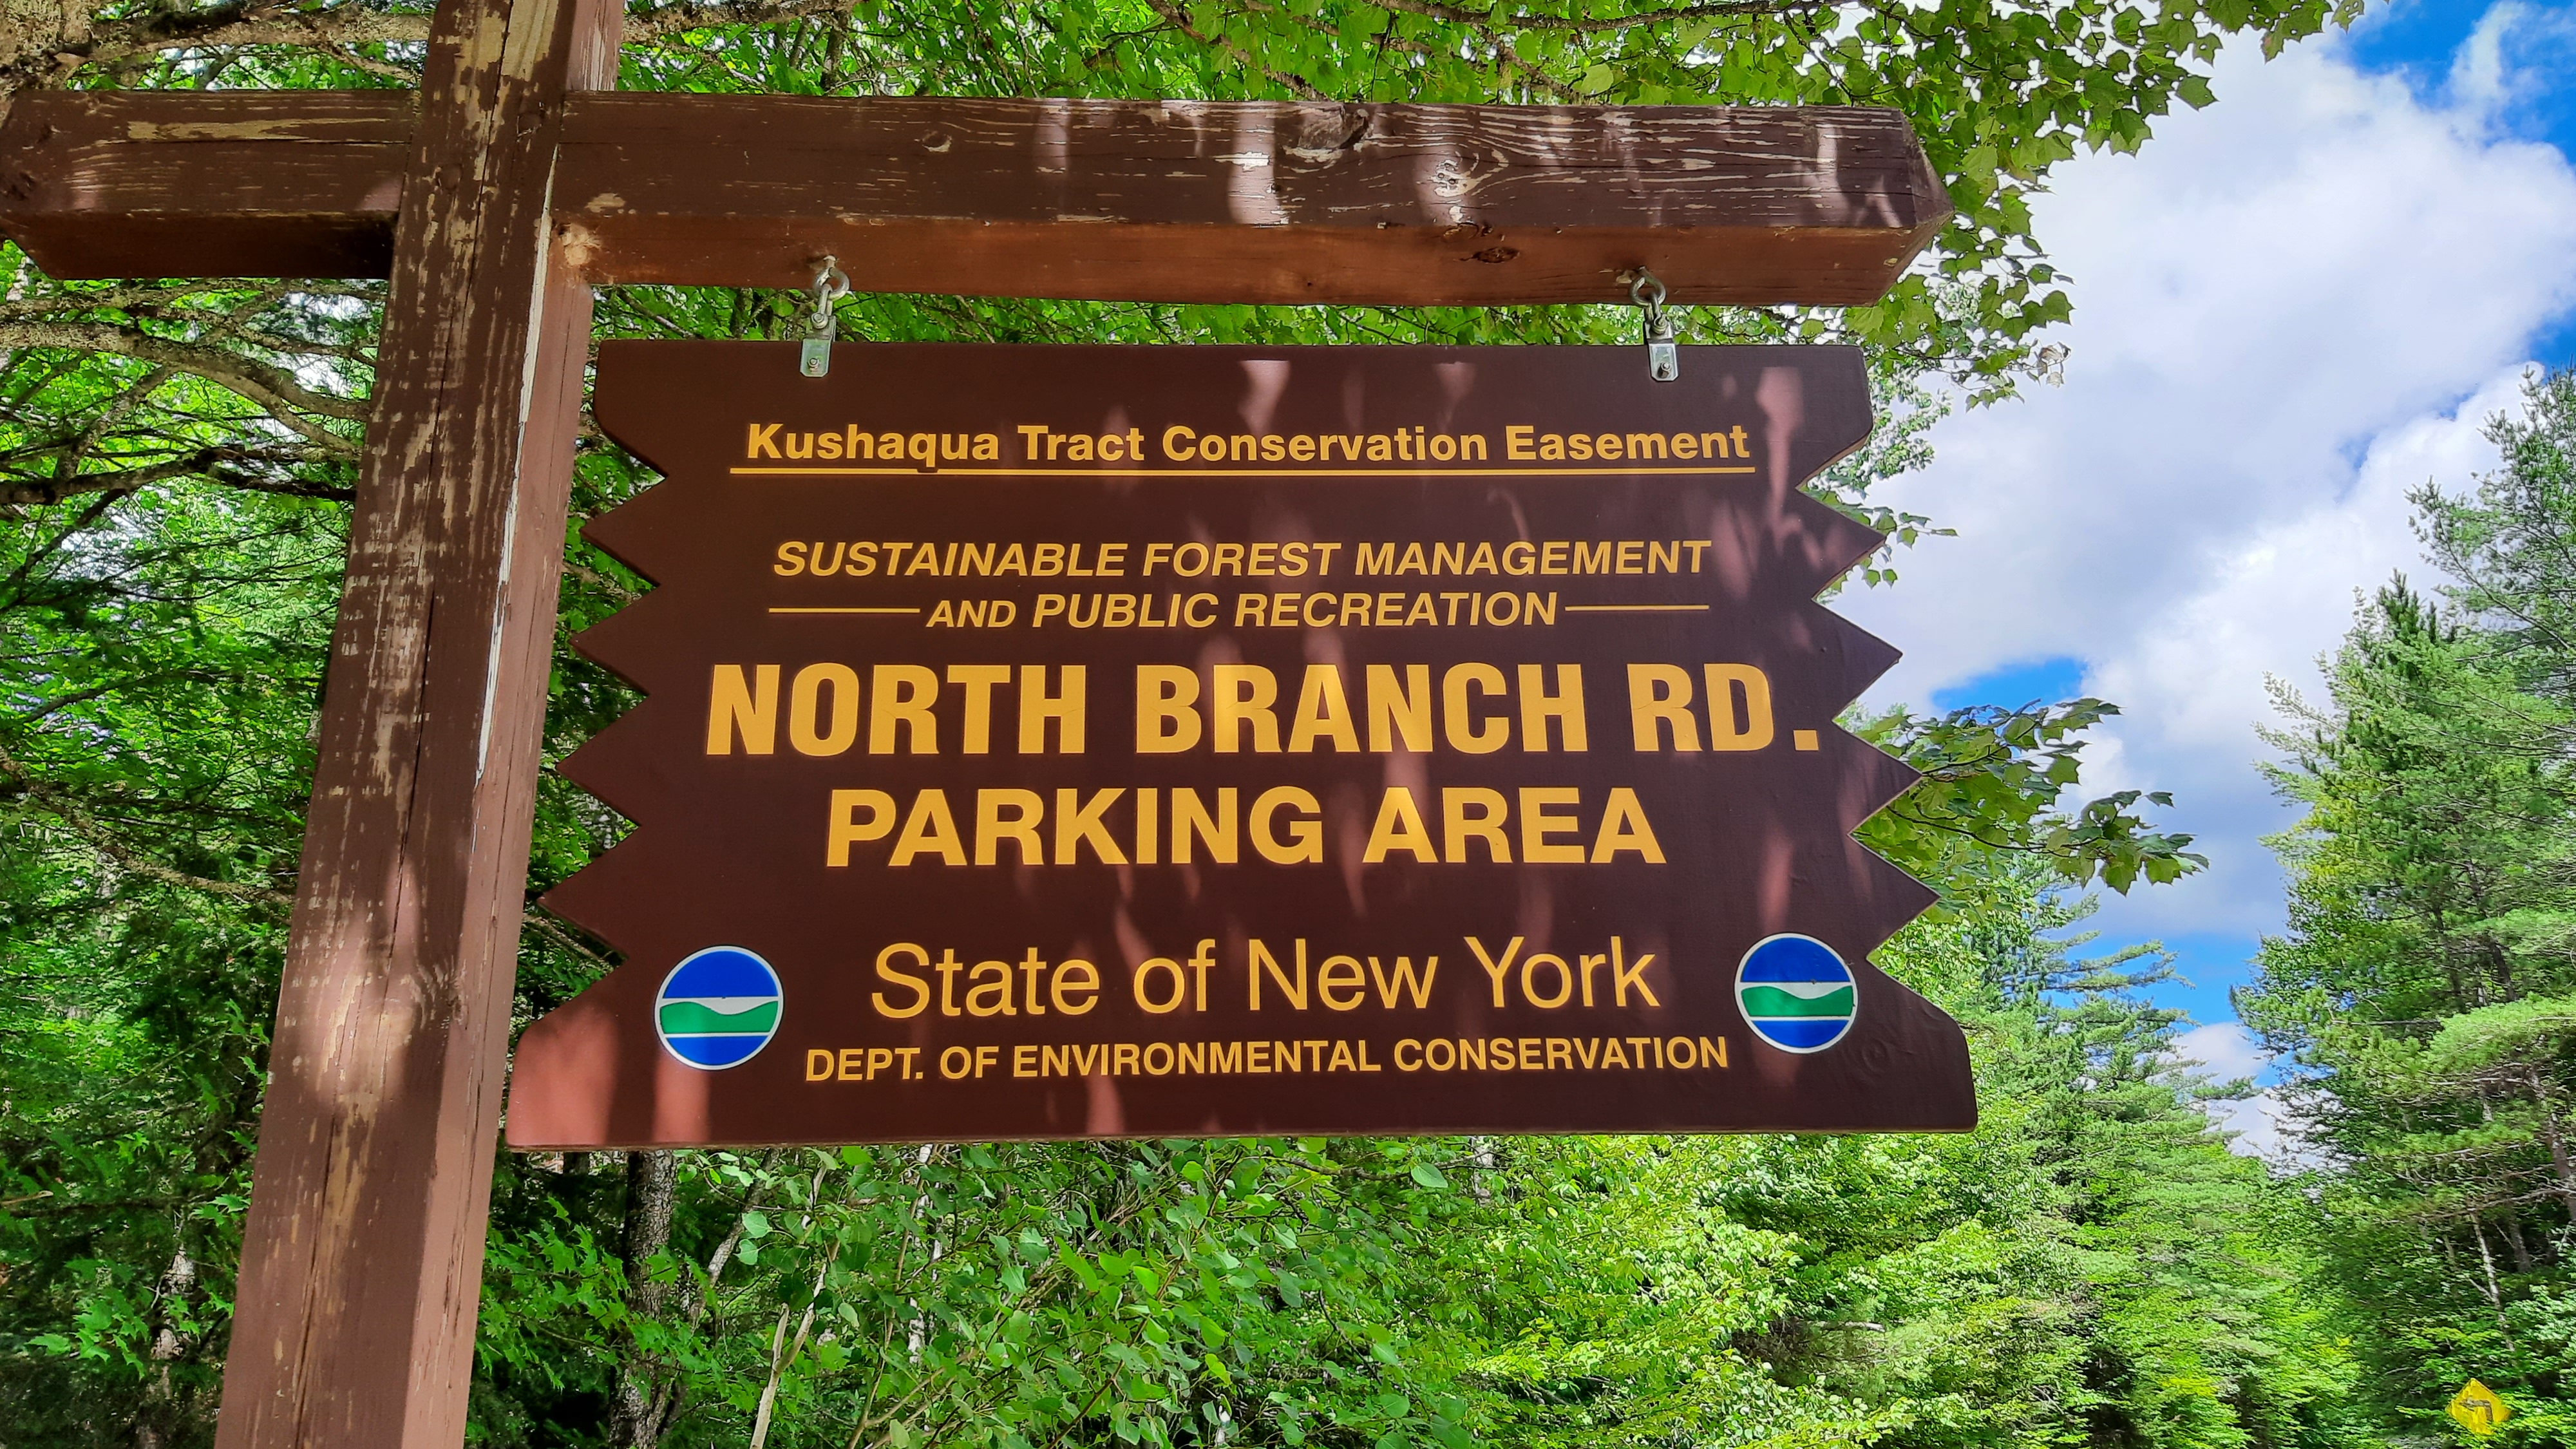 A sign indicating a conservation easement